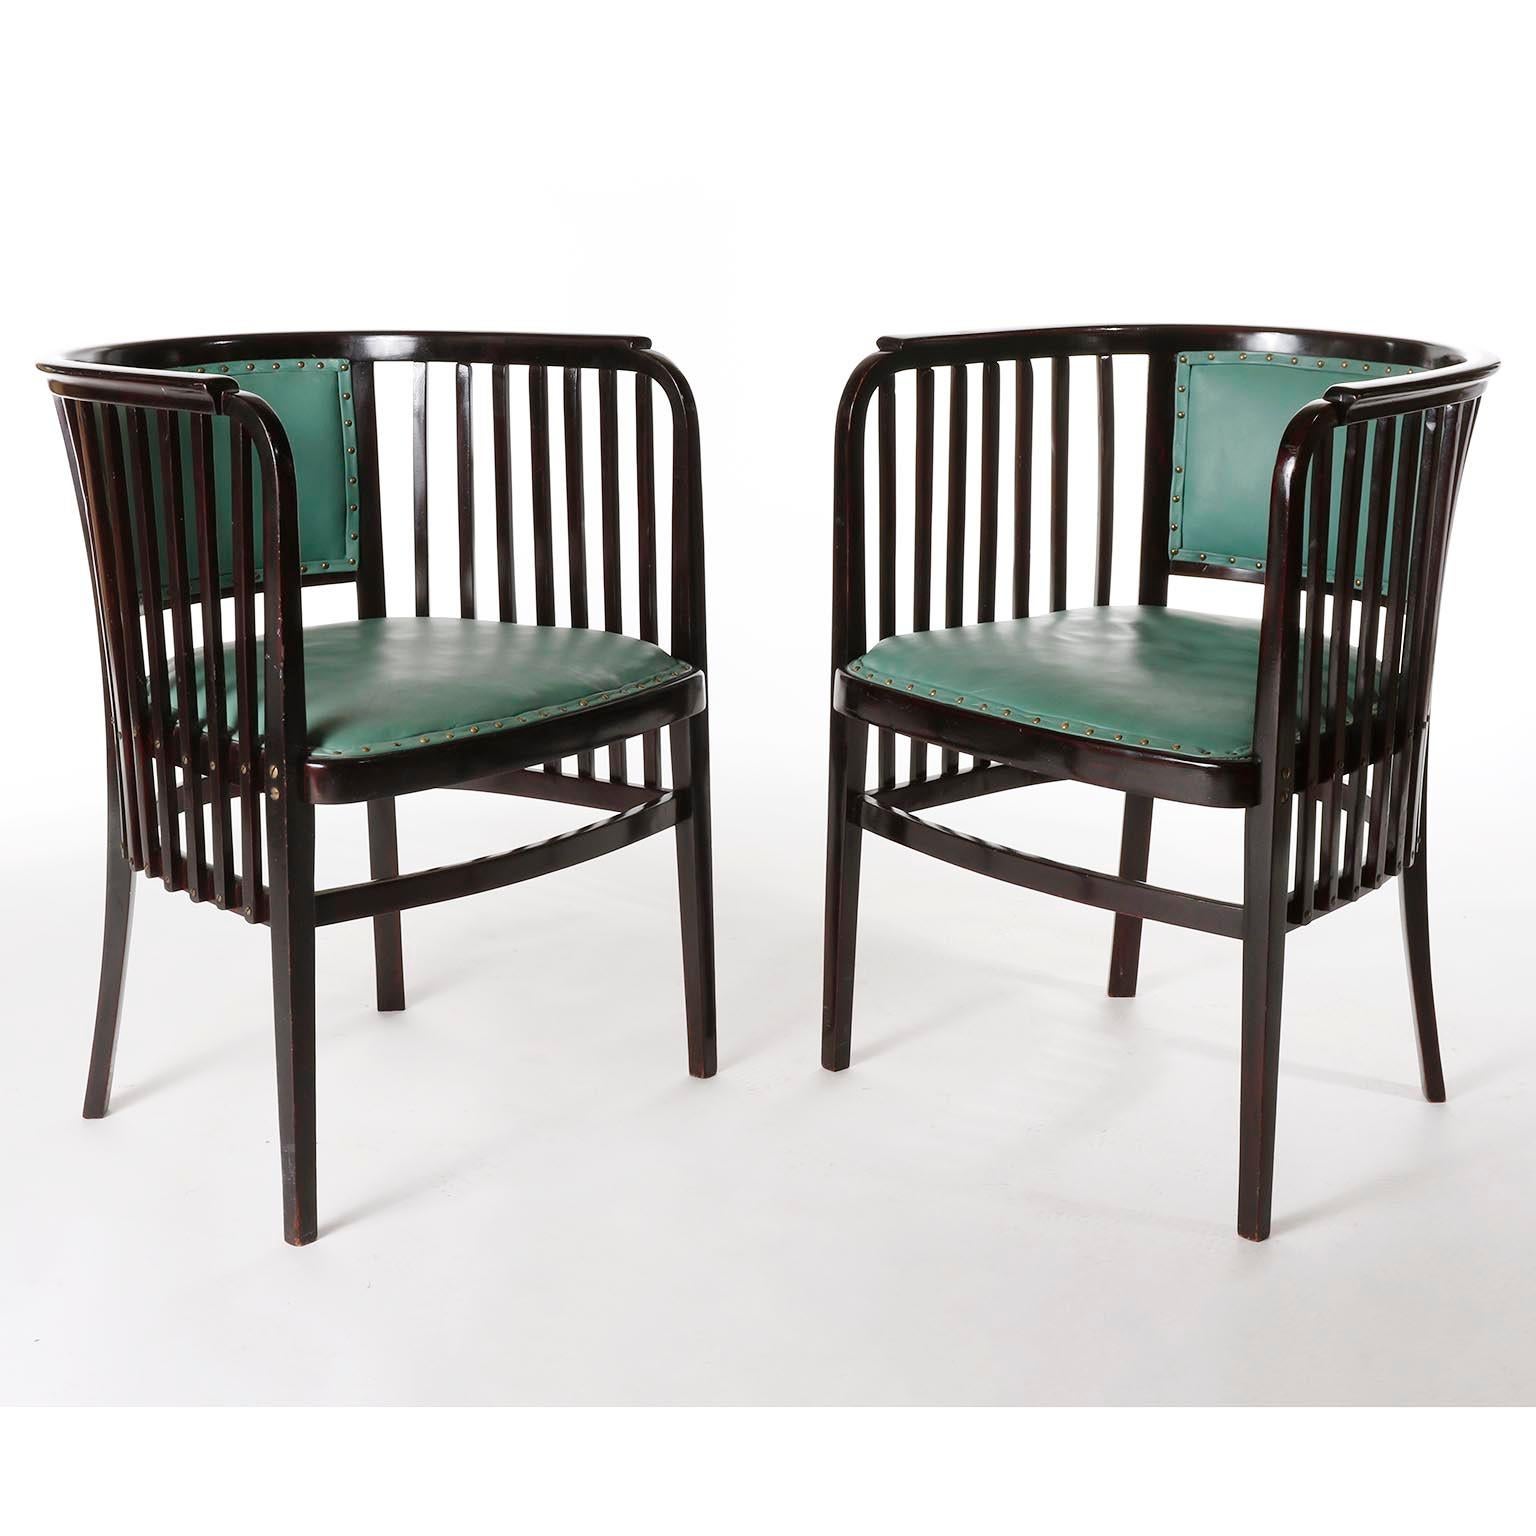 Stained Marcel Kammerer Seating Set Salon Suite, Thonet, Turquoise Green Leather, 1910 For Sale